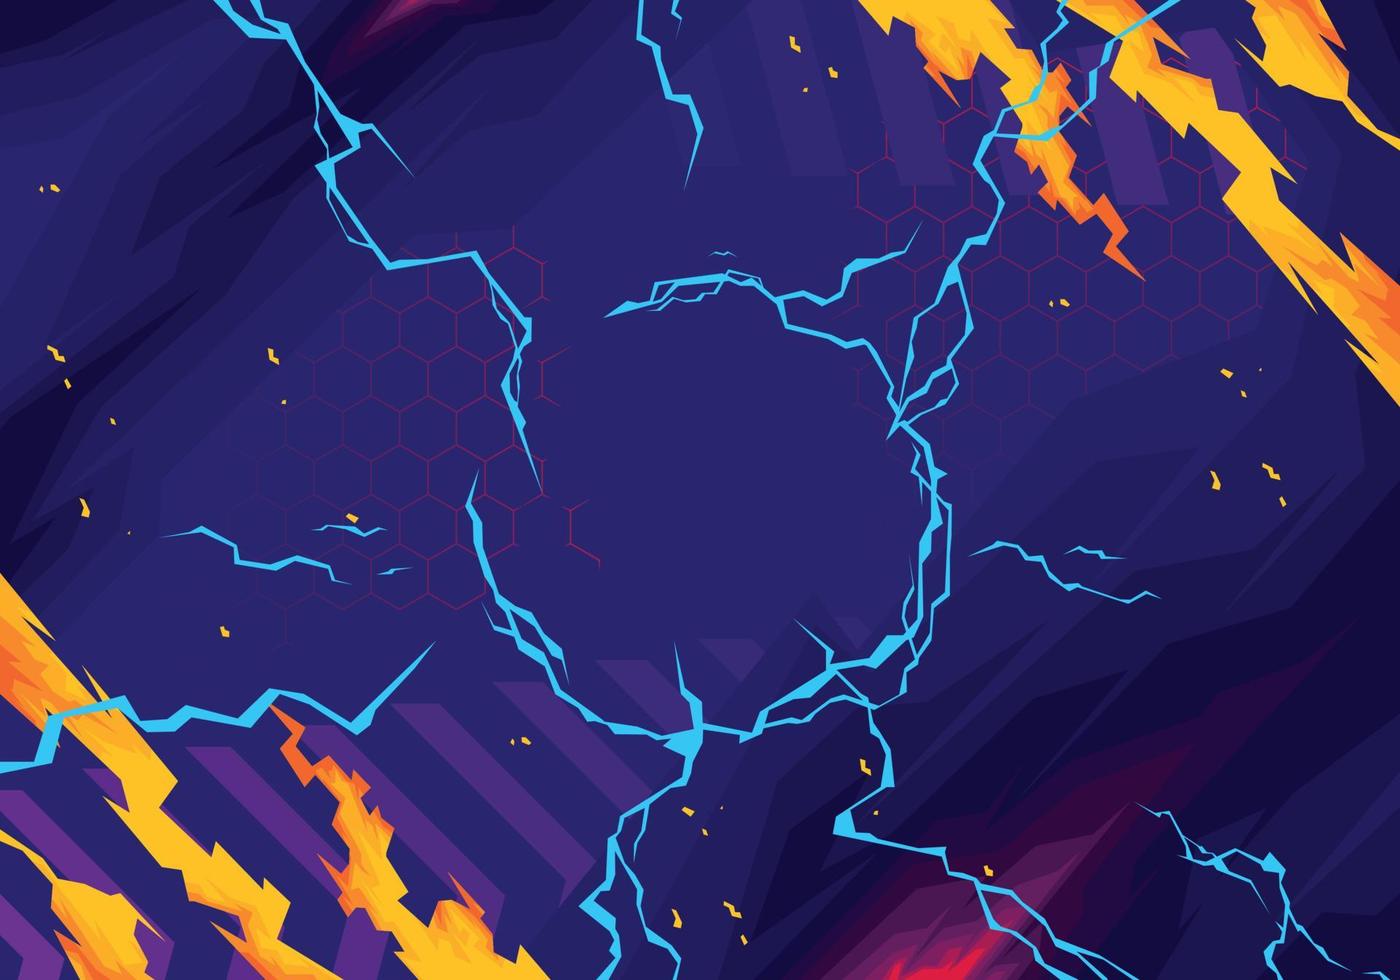 Abstract Background With Electric And Fire Elements vector